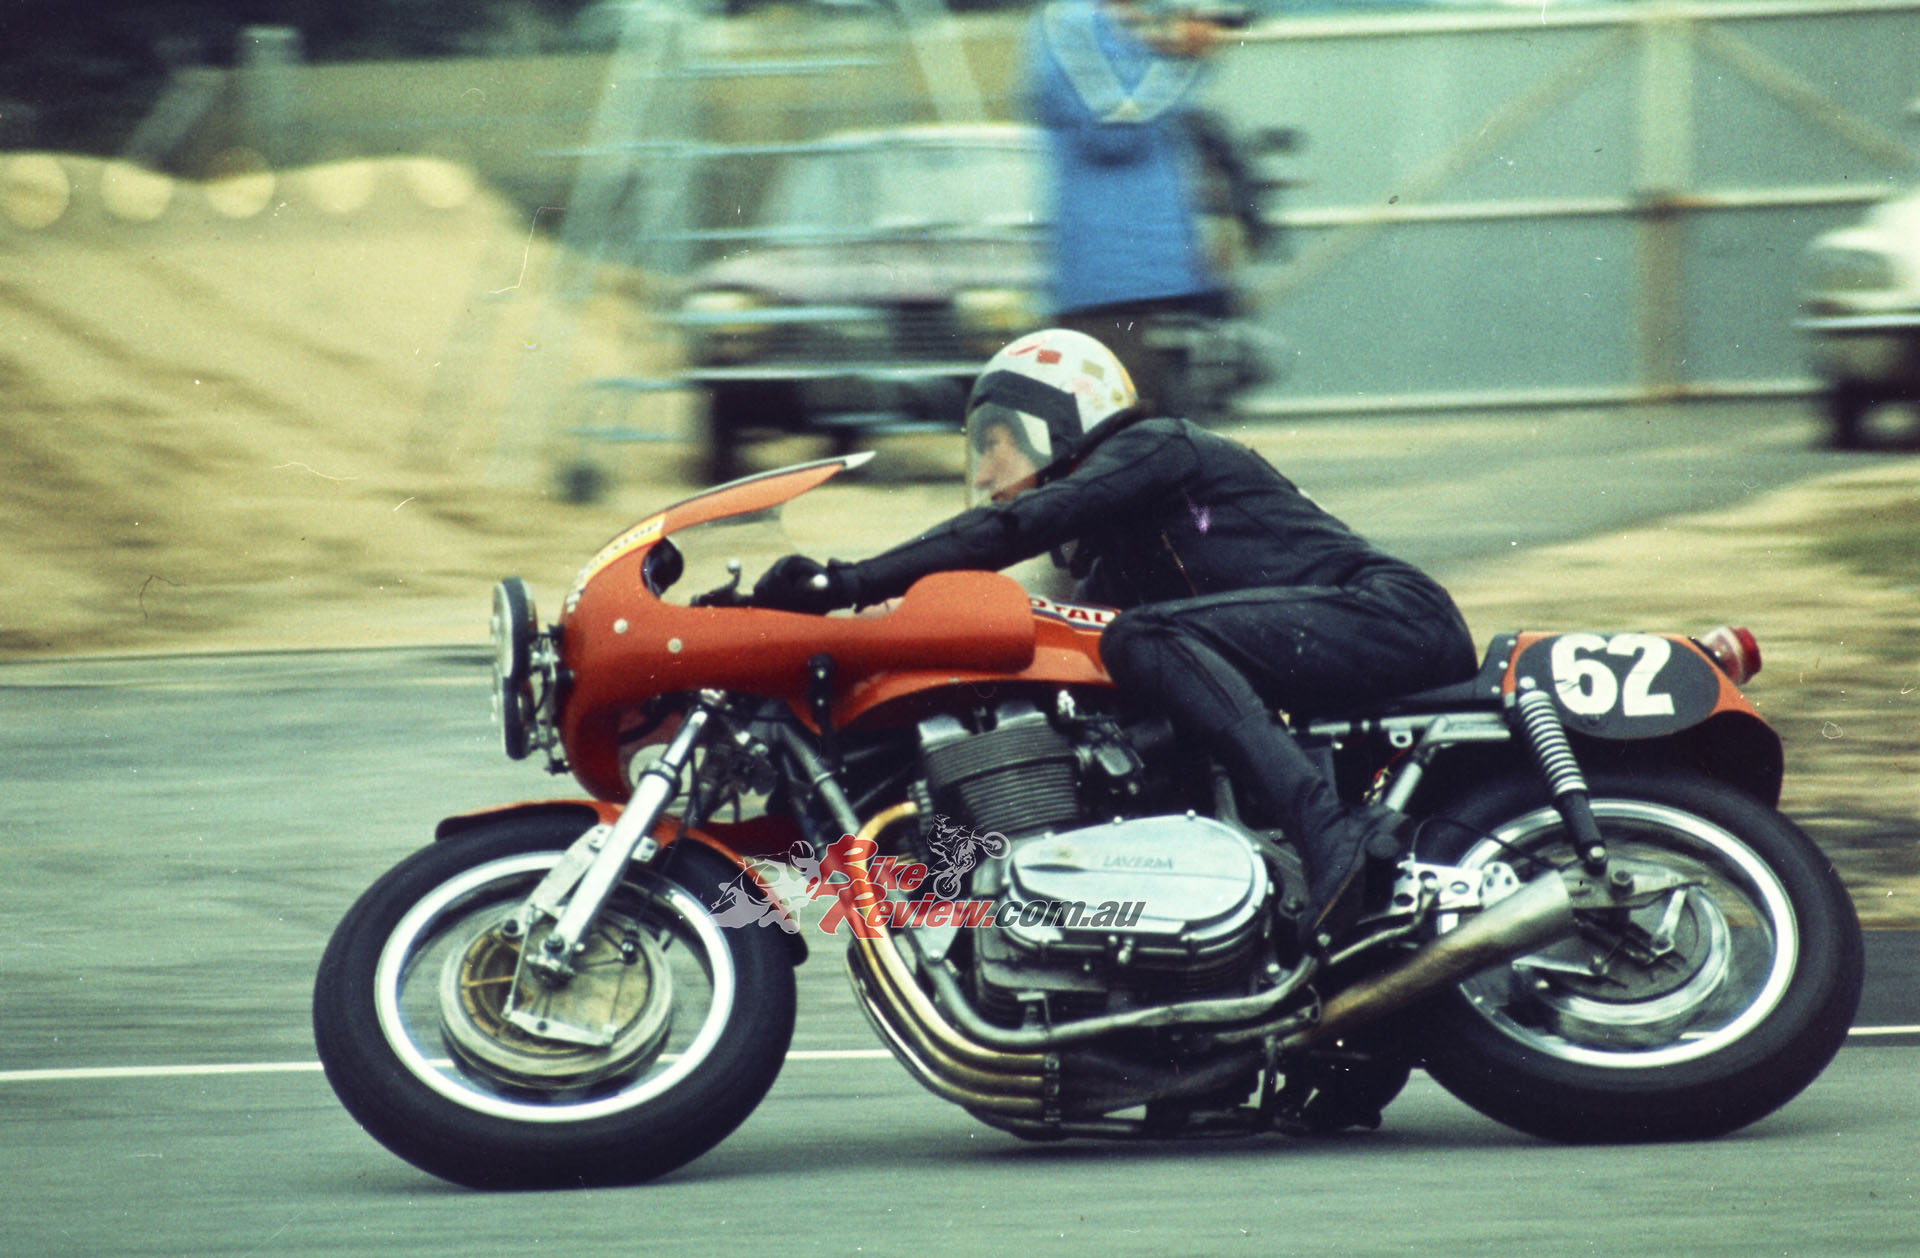 The Endurance debut of the 3C 1000 took place in September 1972's Bol d’Or 24hrs held on the Bugattti circuit at Le Mans, with Brits Tony Melody and Doug Cash riding a bike with a modified chassis.